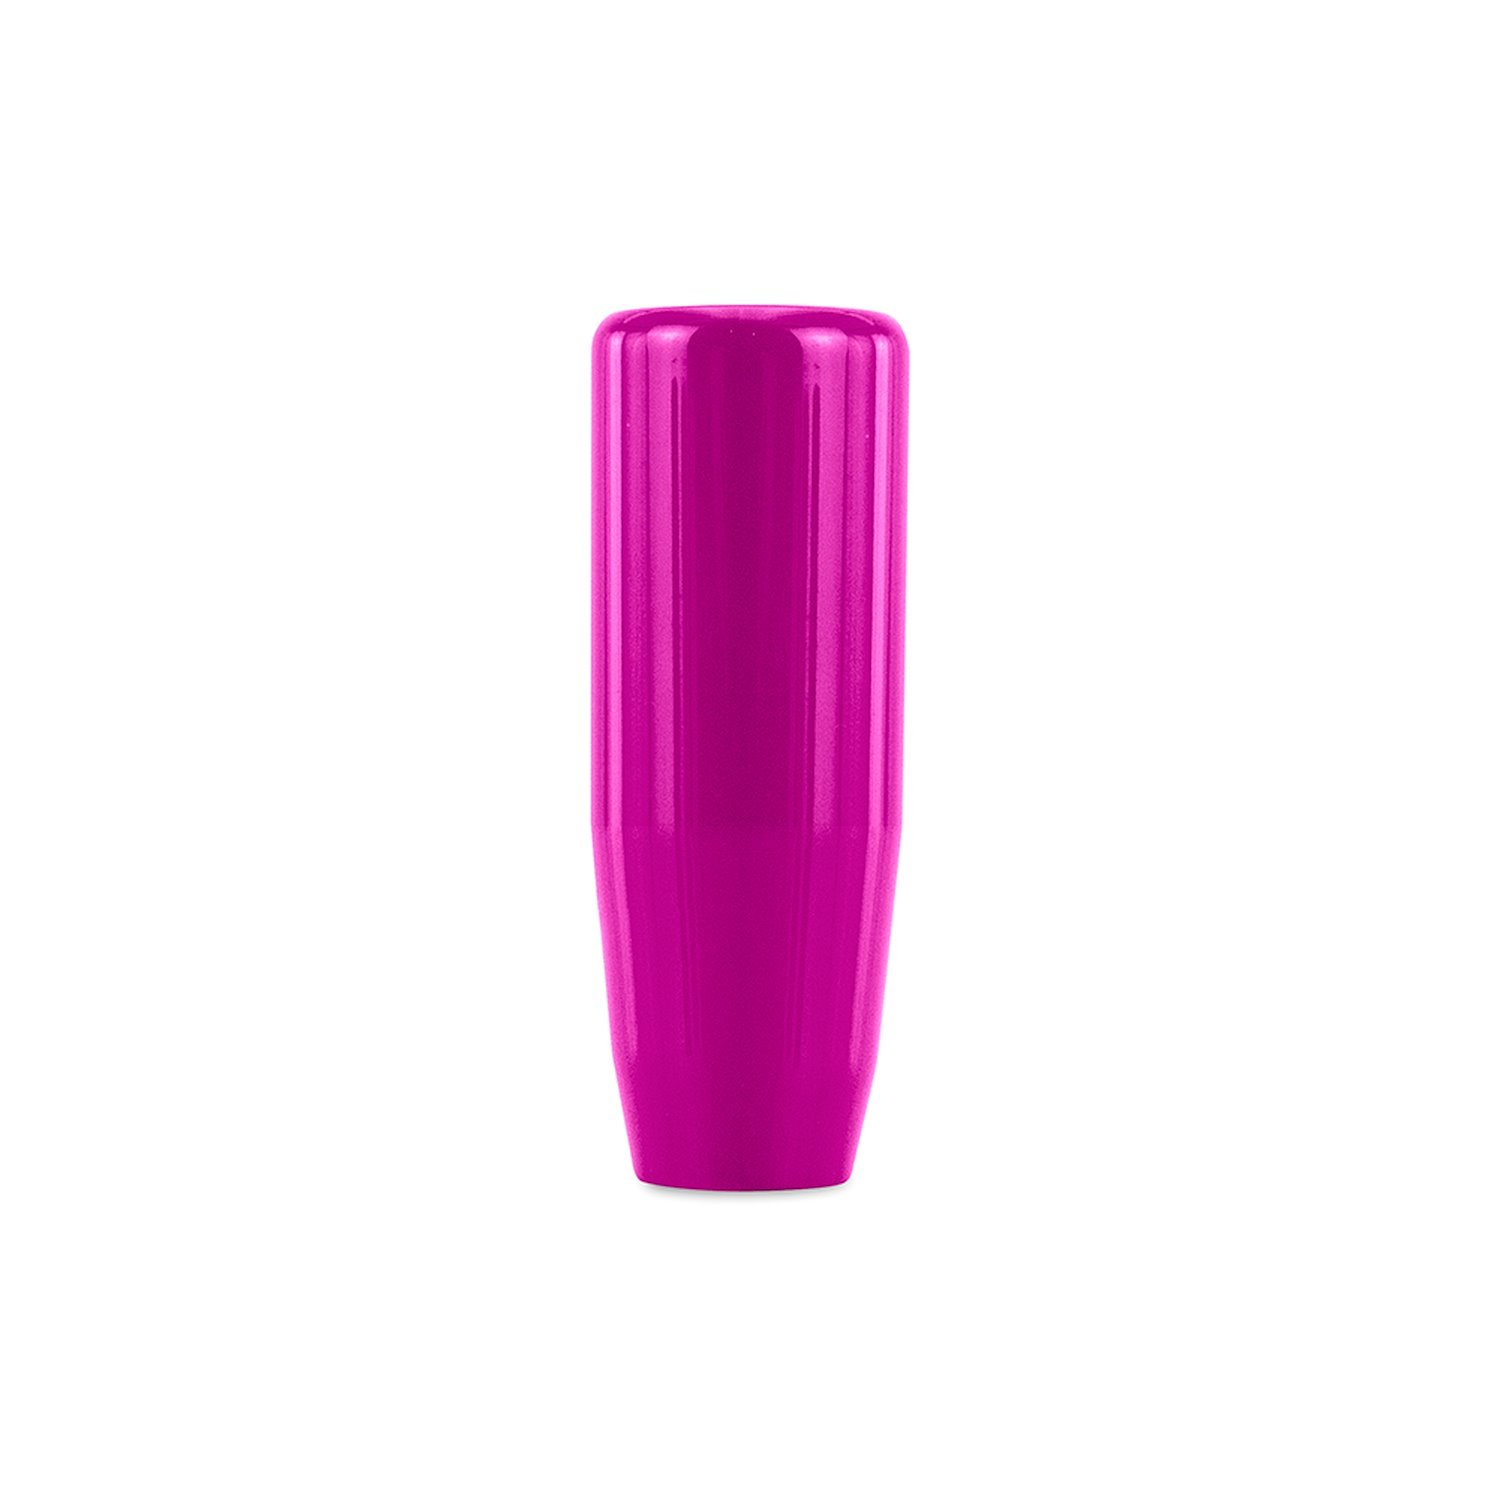 WEIGHTED SHIFT KNOB PINK